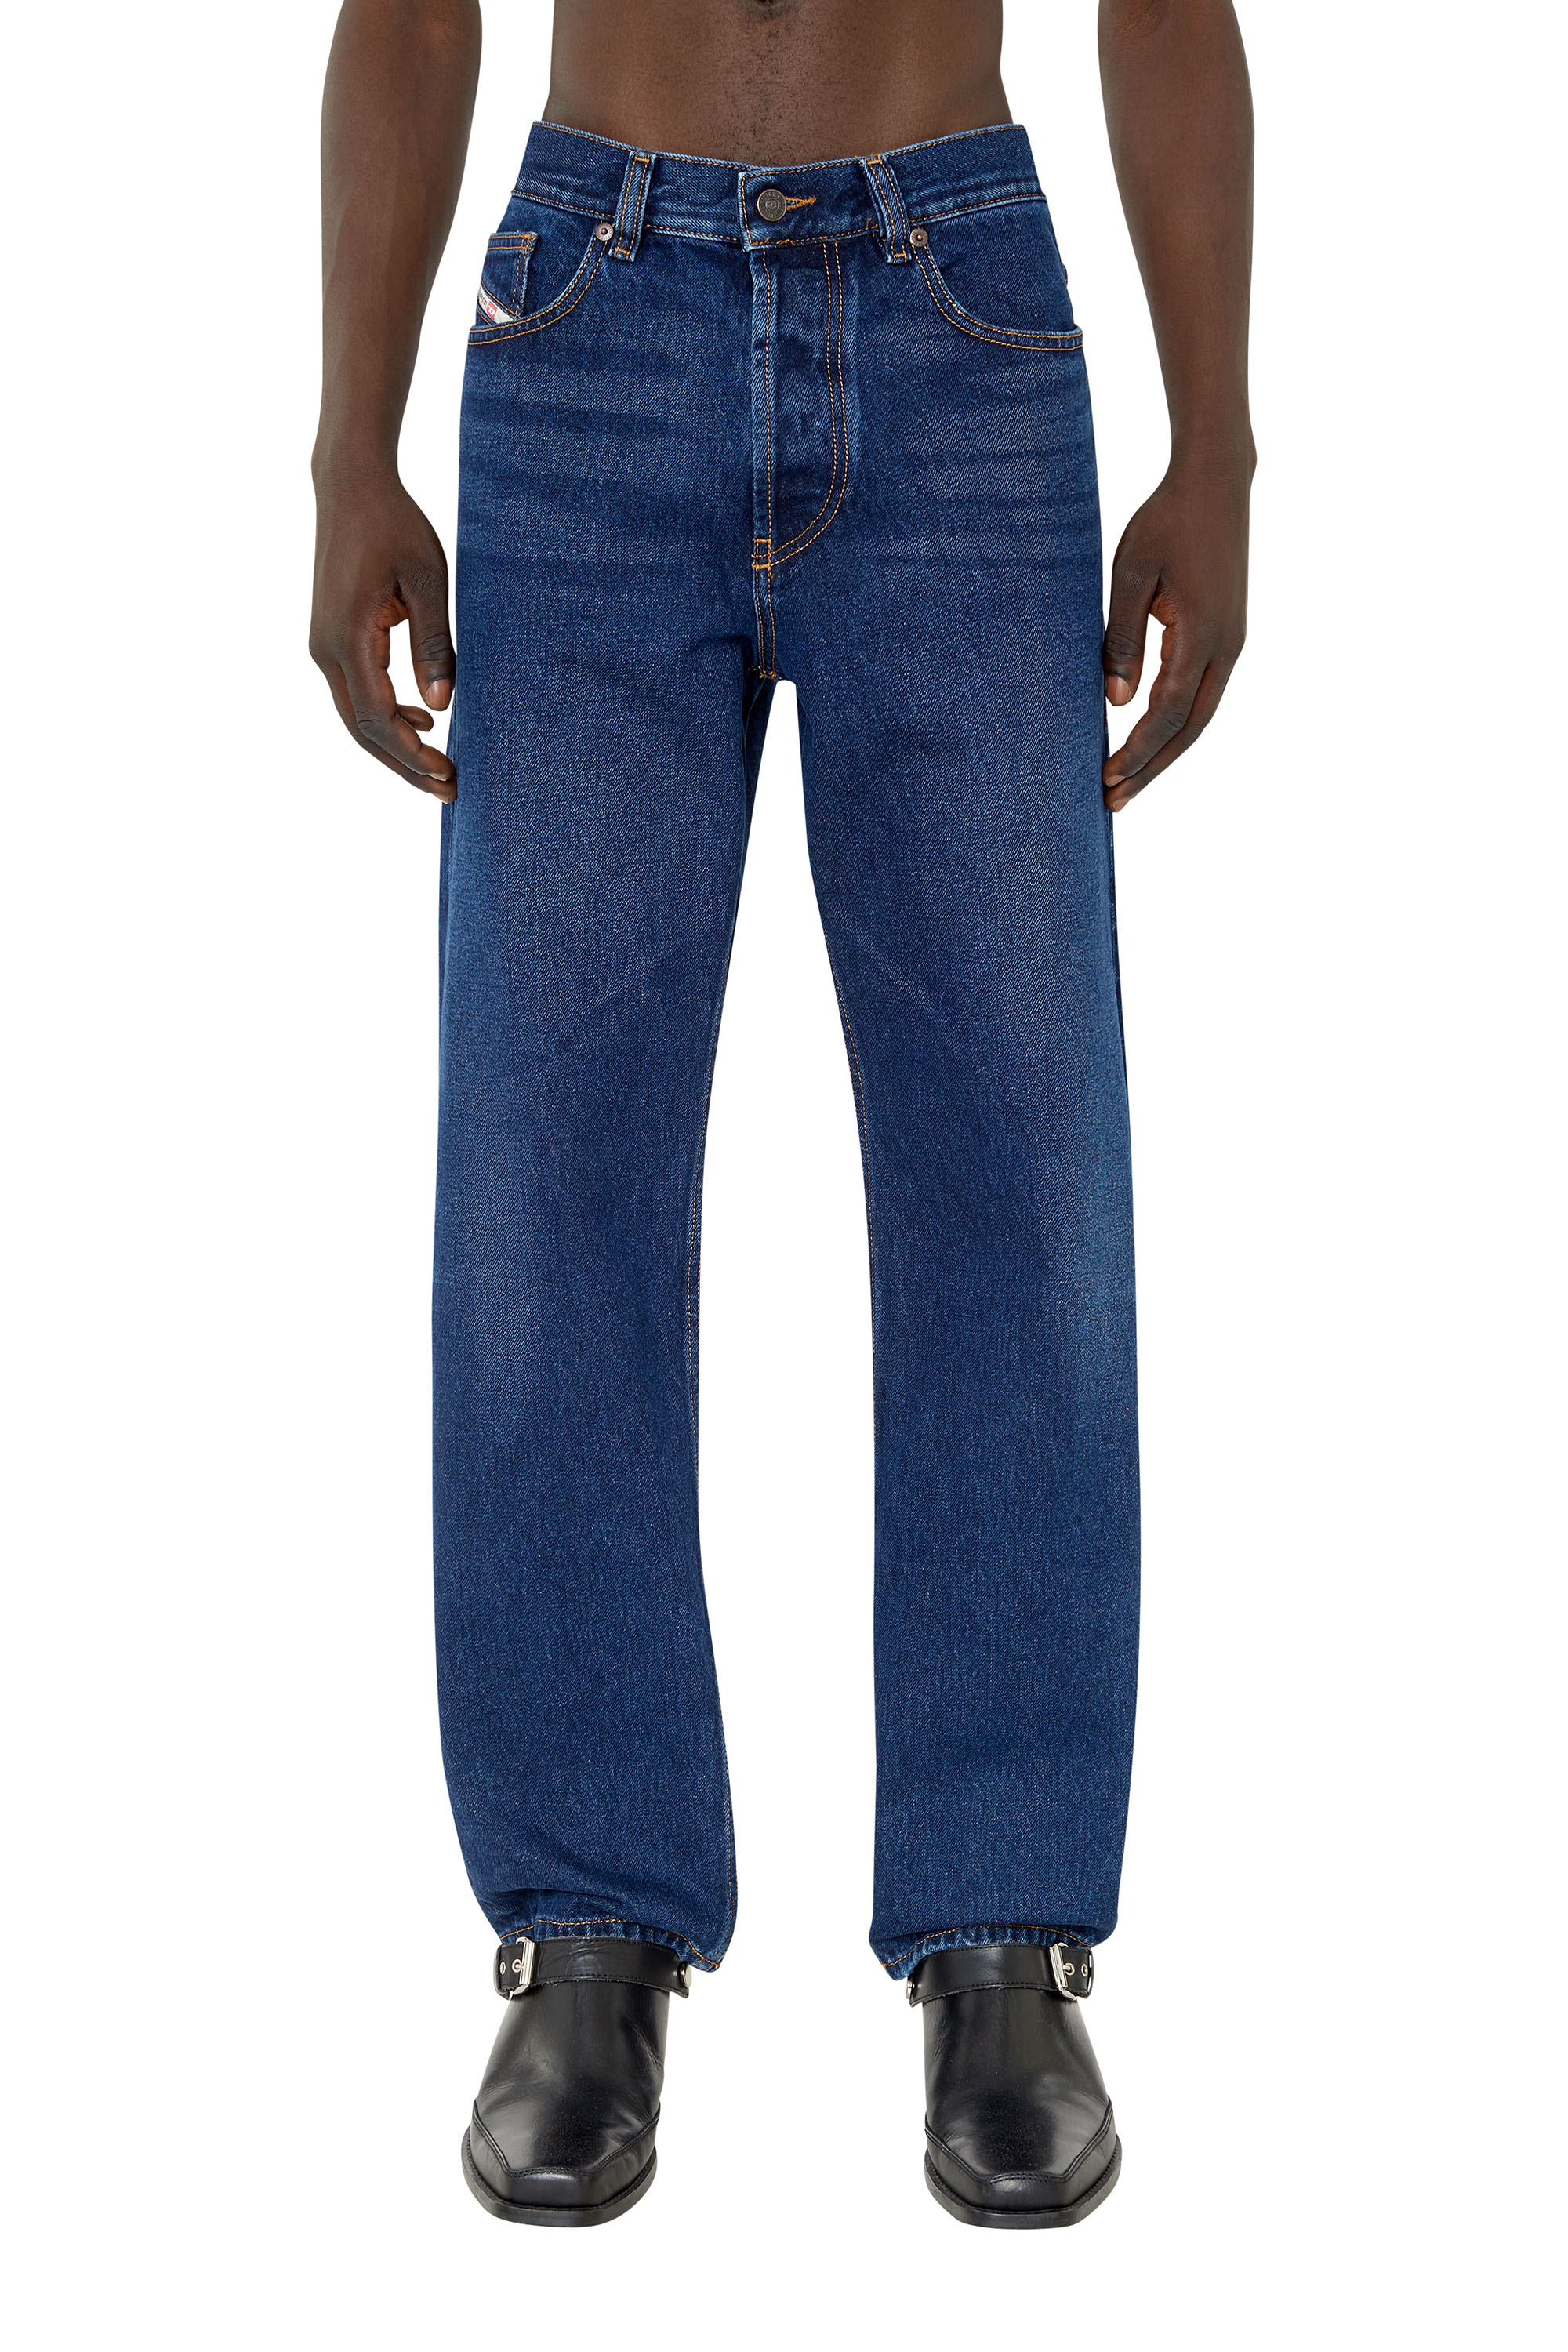 The D-Arbus straight jeans you are looking for has evolved